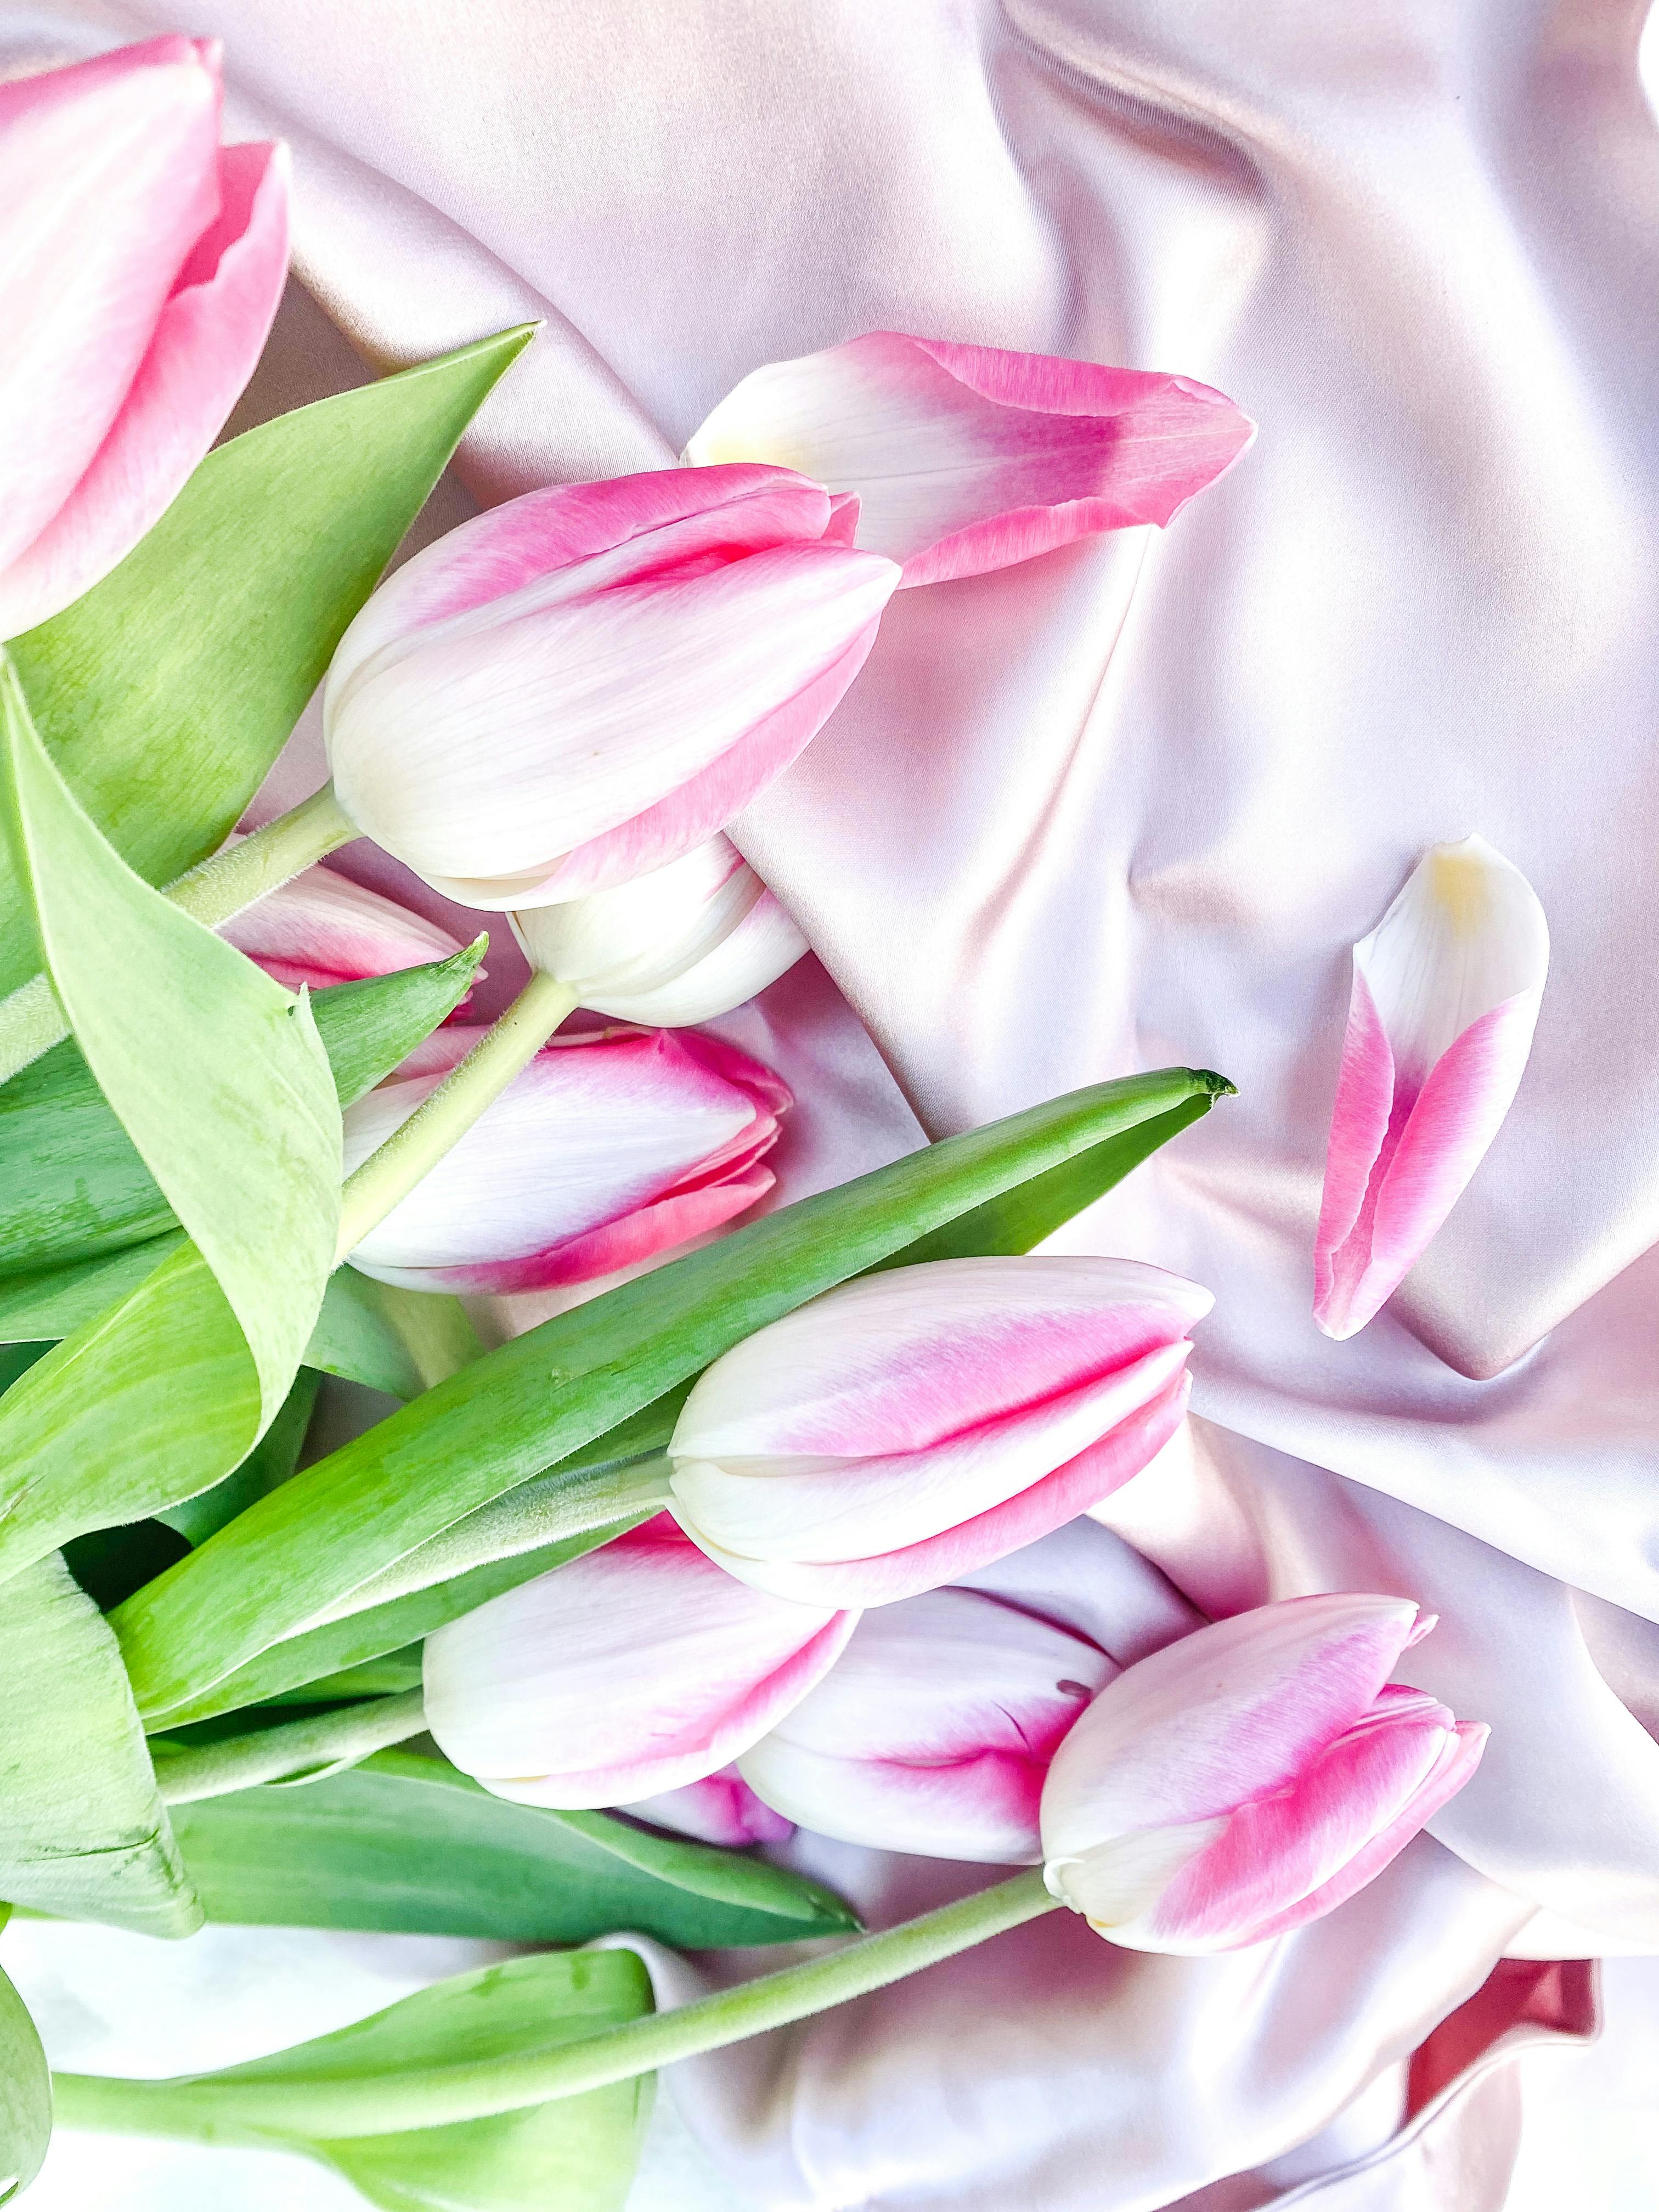 Download wallpaper 1125x2436 heart shapes flowers pink tulips iphone x  1125x2436 hd background 18701